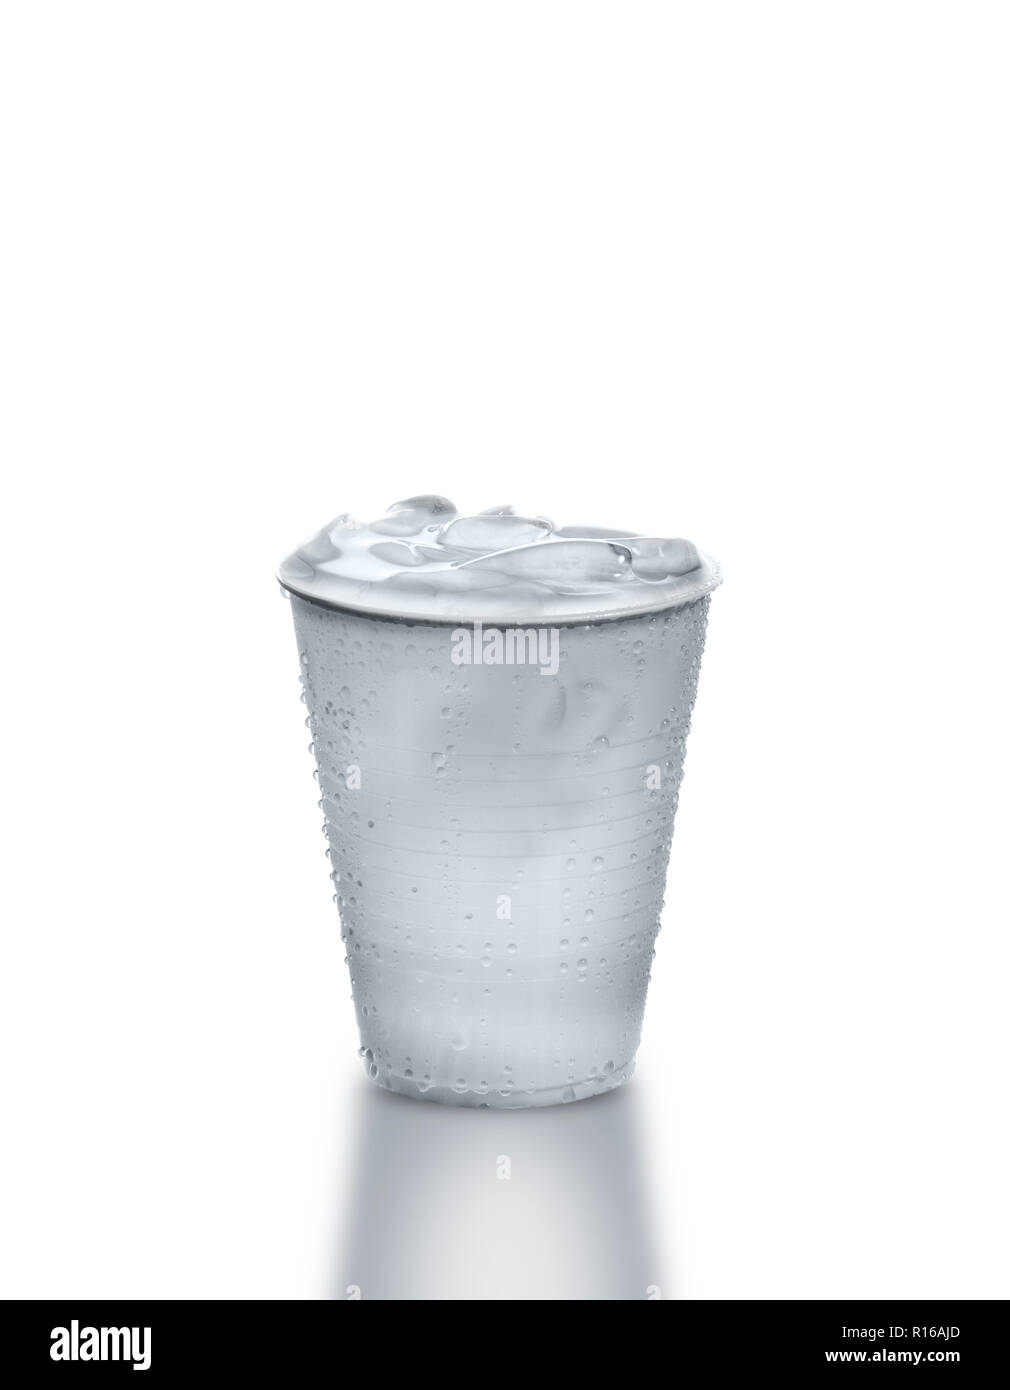 https://c8.alamy.com/comp/R16AJD/plastic-cup-full-of-iced-water-against-white-background-R16AJD.jpg